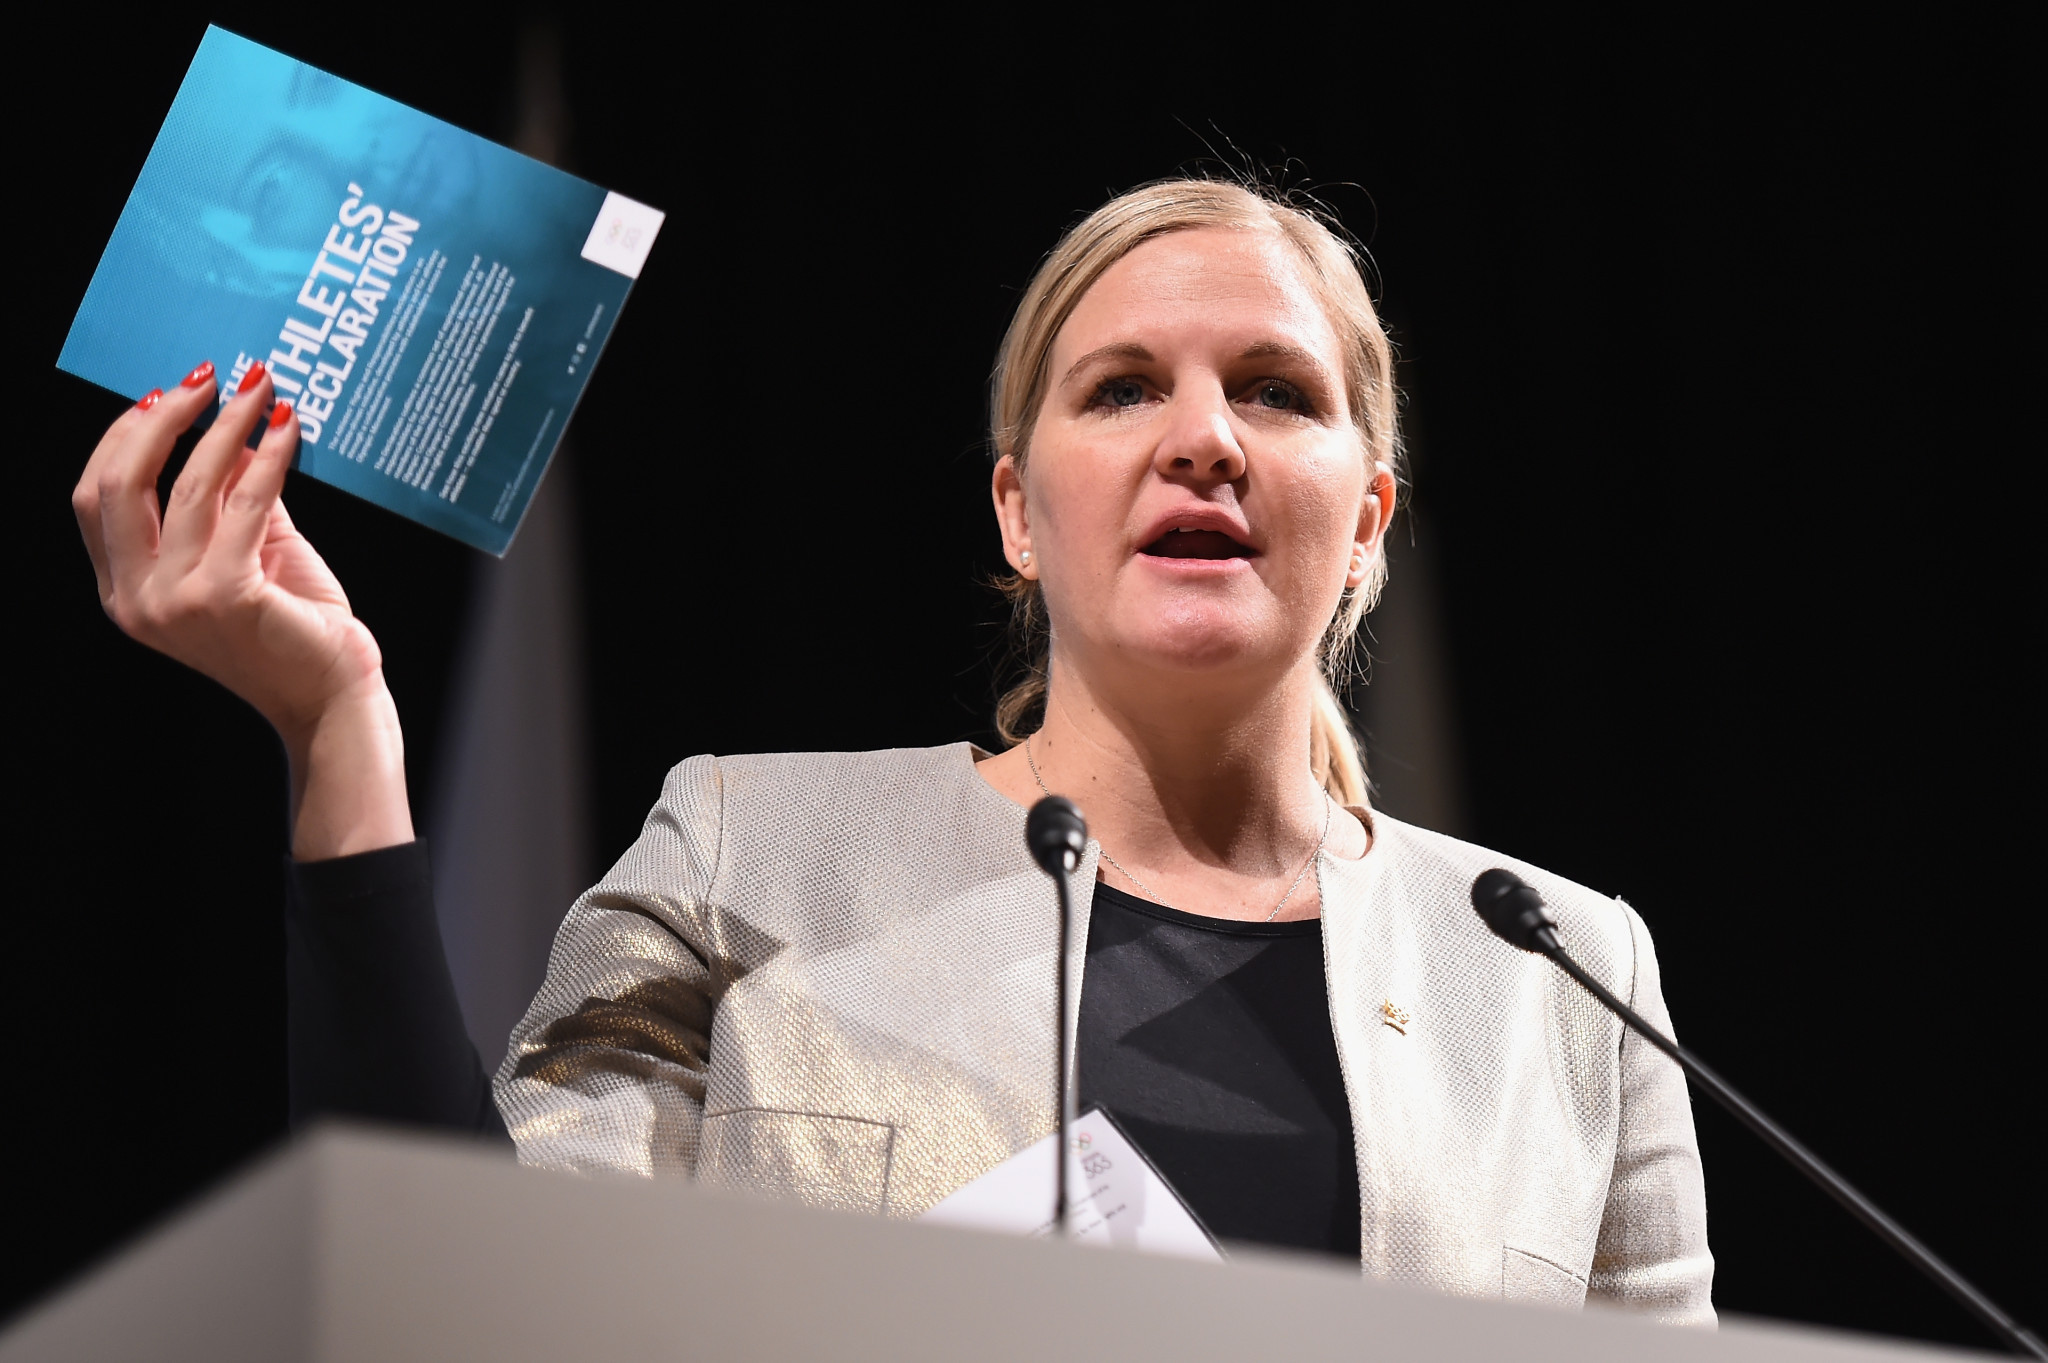 The IOC Athletes' Commission is chaired by Zimbabwe's Kirsty Coventry ©Getty Images